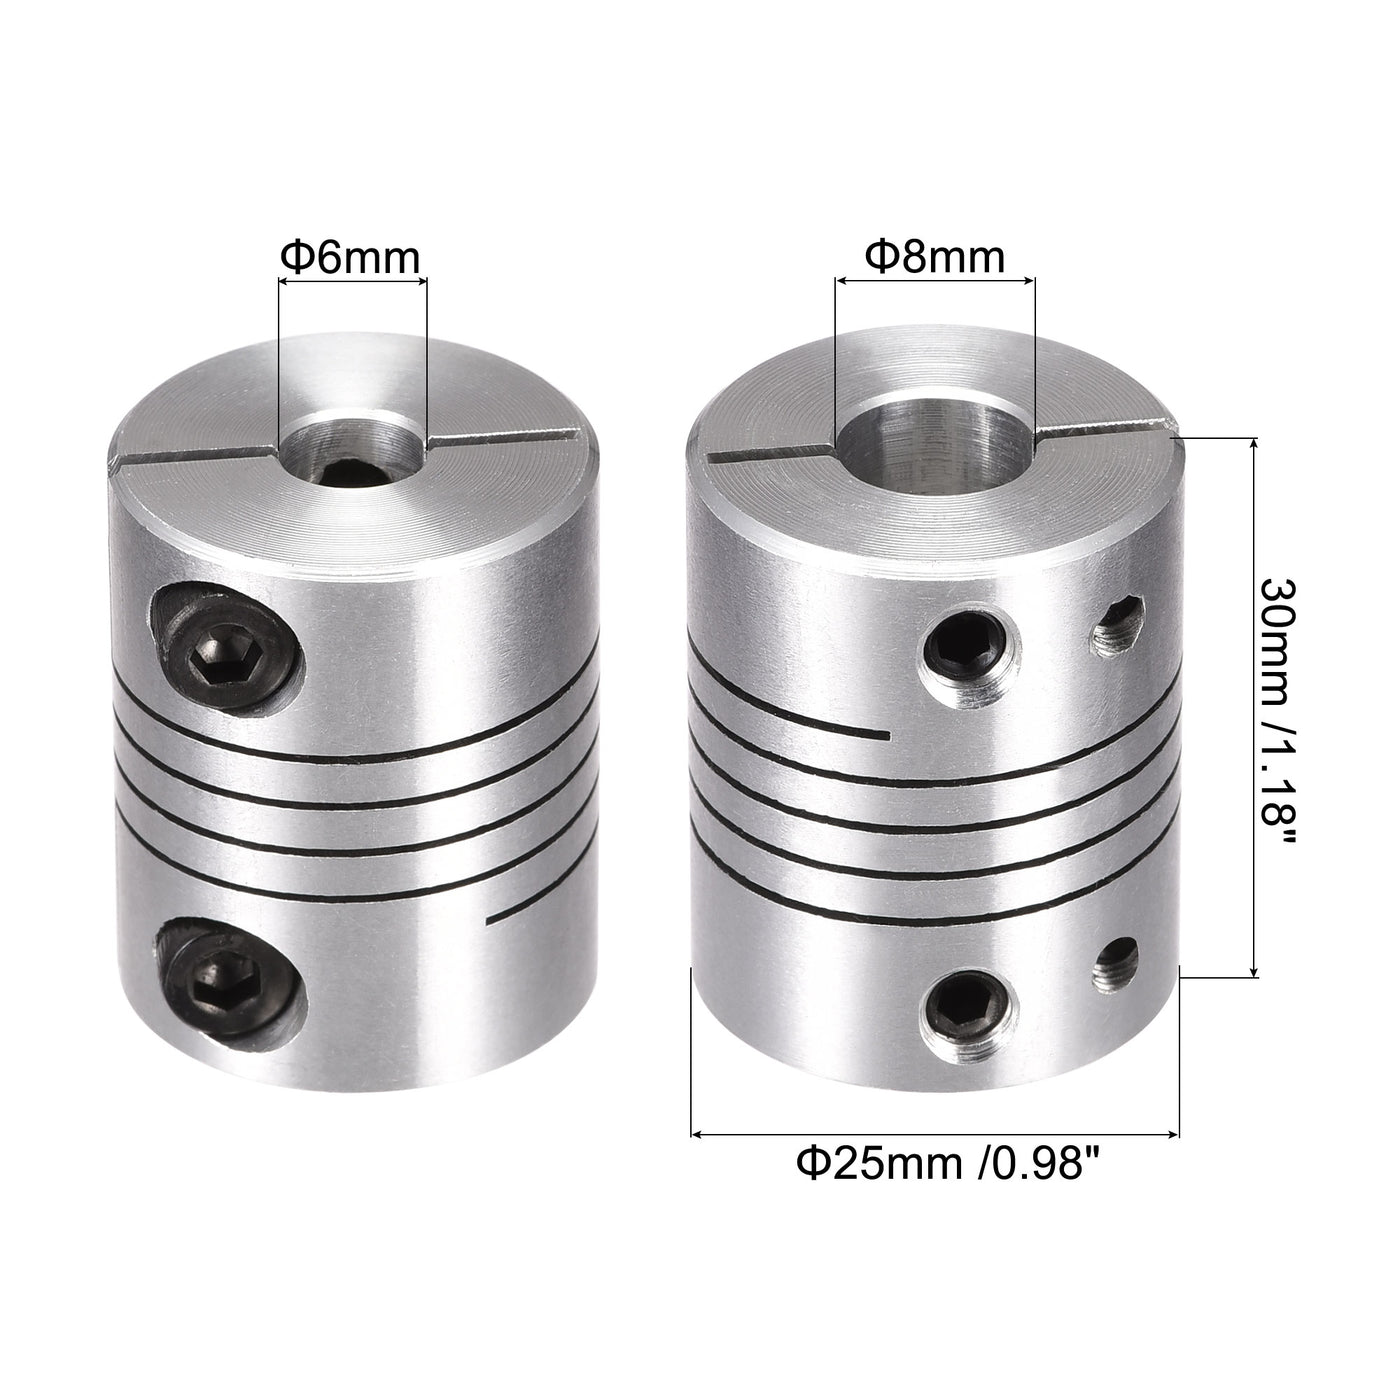 uxcell Uxcell 2PCS Motor Shaft 6mm to 8mm Helical Beam Coupler Coupling 25mm Dia 30mm Length